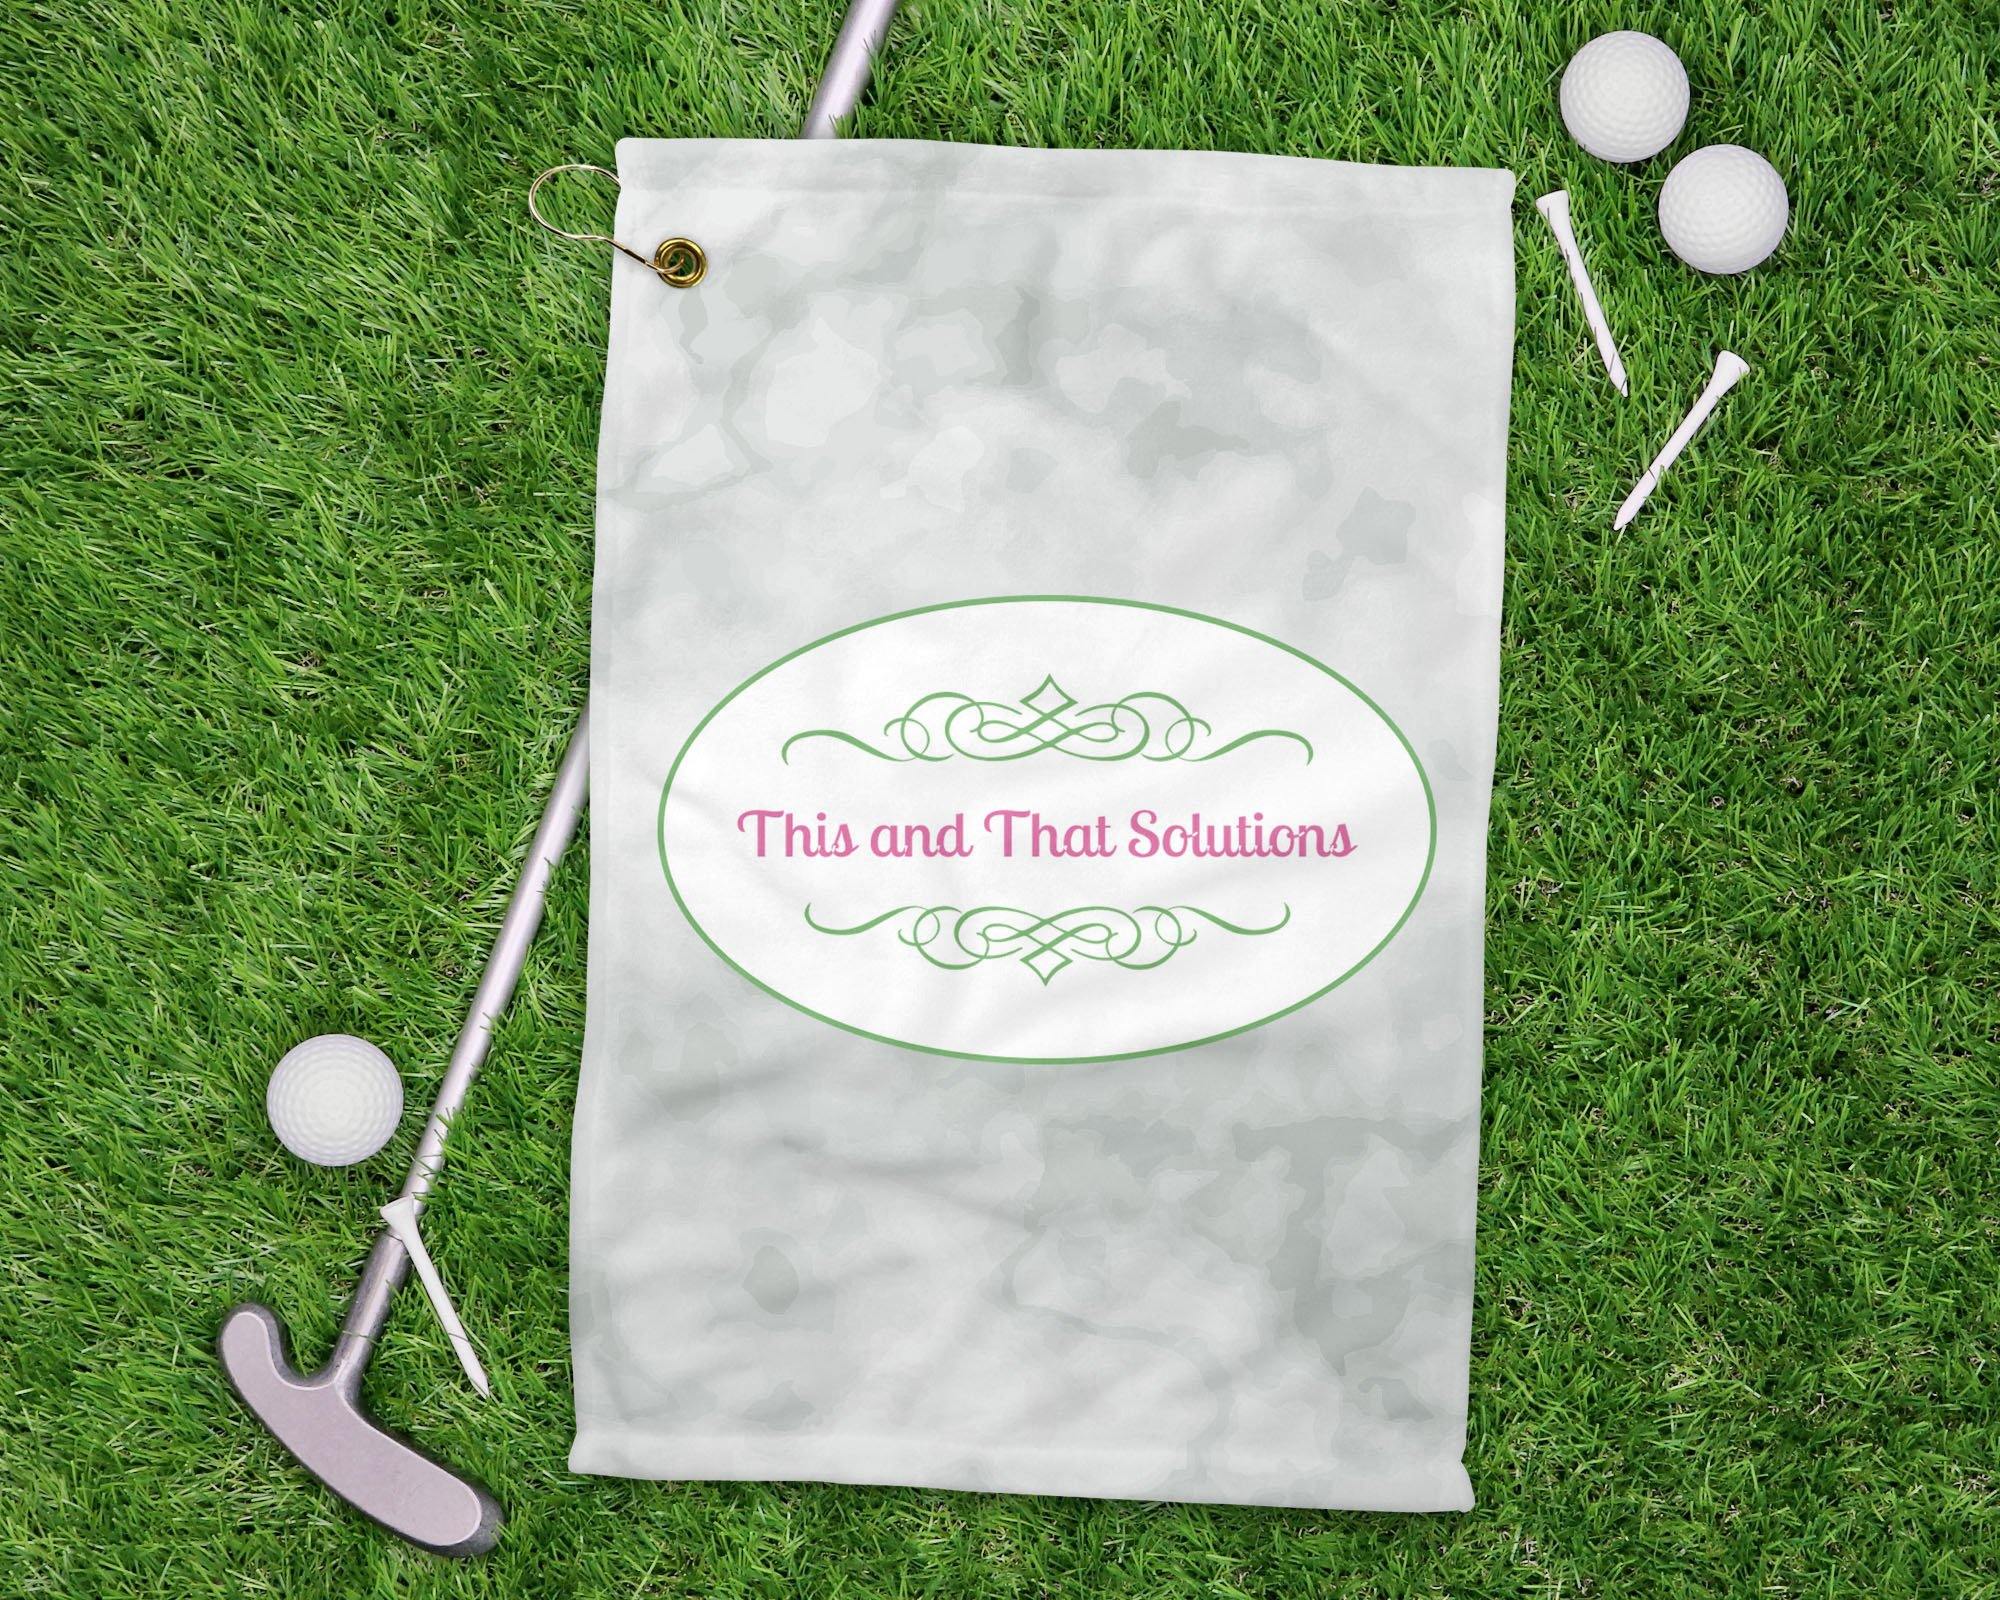 Personalized Golf Accessories | Custom Golf Towel | Company Logo - This & That Solutions - Personalized Golf Accessories | Custom Golf Towel | Company Logo - Personalized Gifts & Custom Home Decor